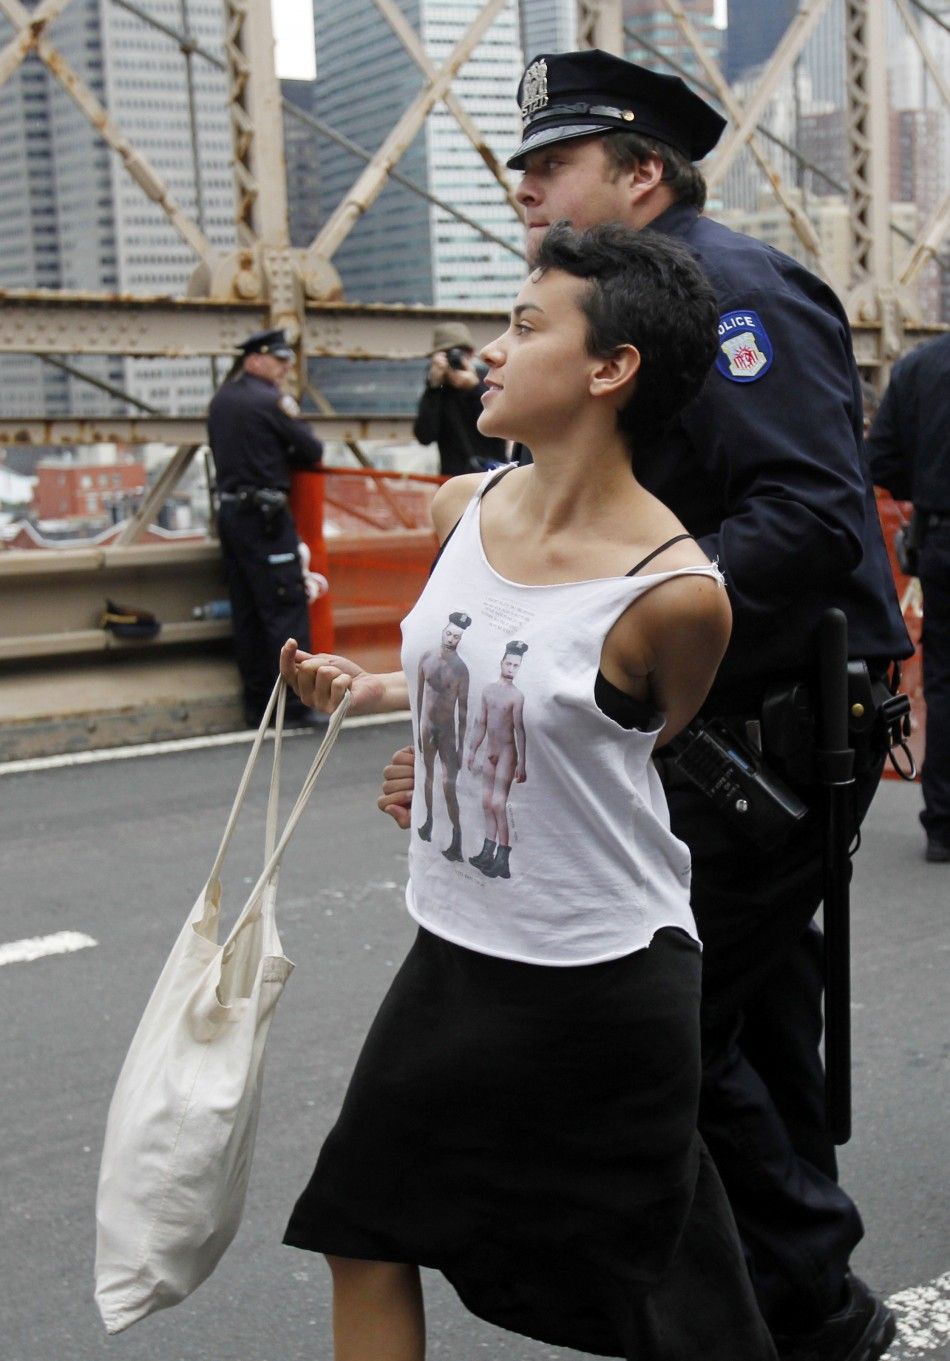 Anonymous Release Videos Showing Occupy Wall Street Brooklyn Bridge Arrests